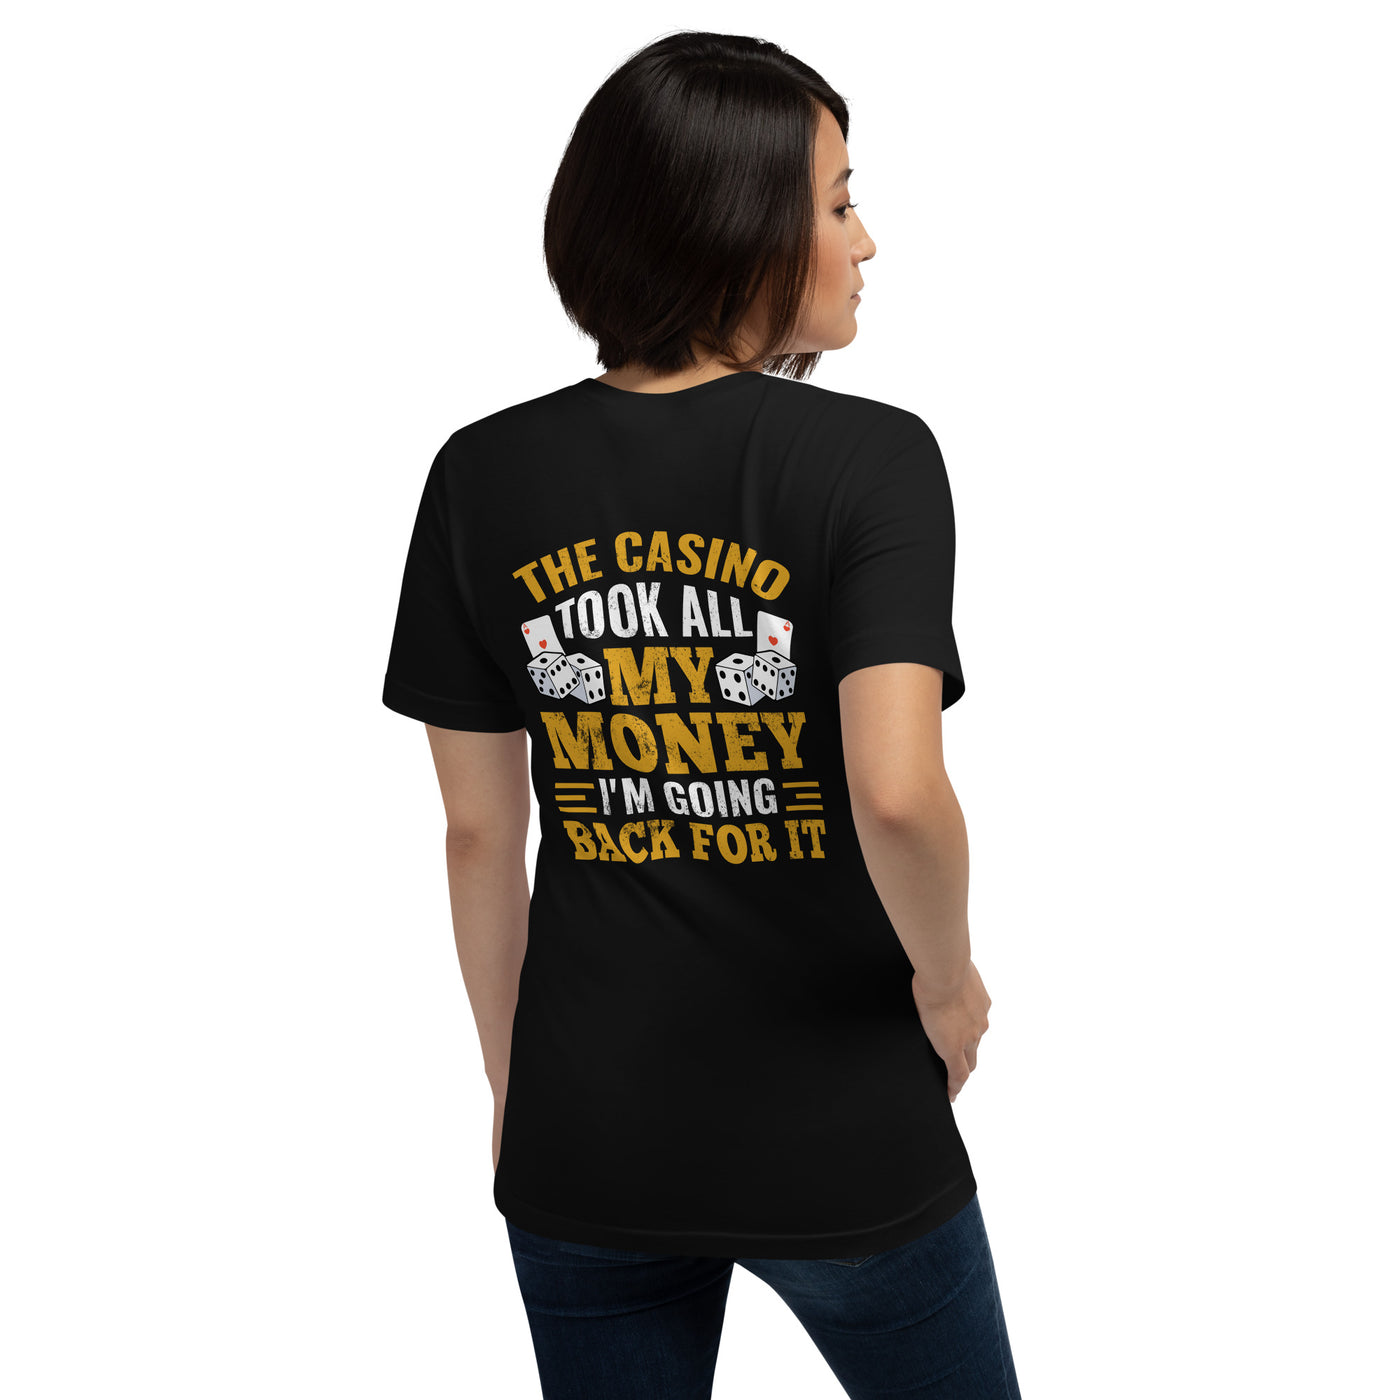 The Casino Took all my money, I am Going back for it - Unisex t-shirt ( Back Print )